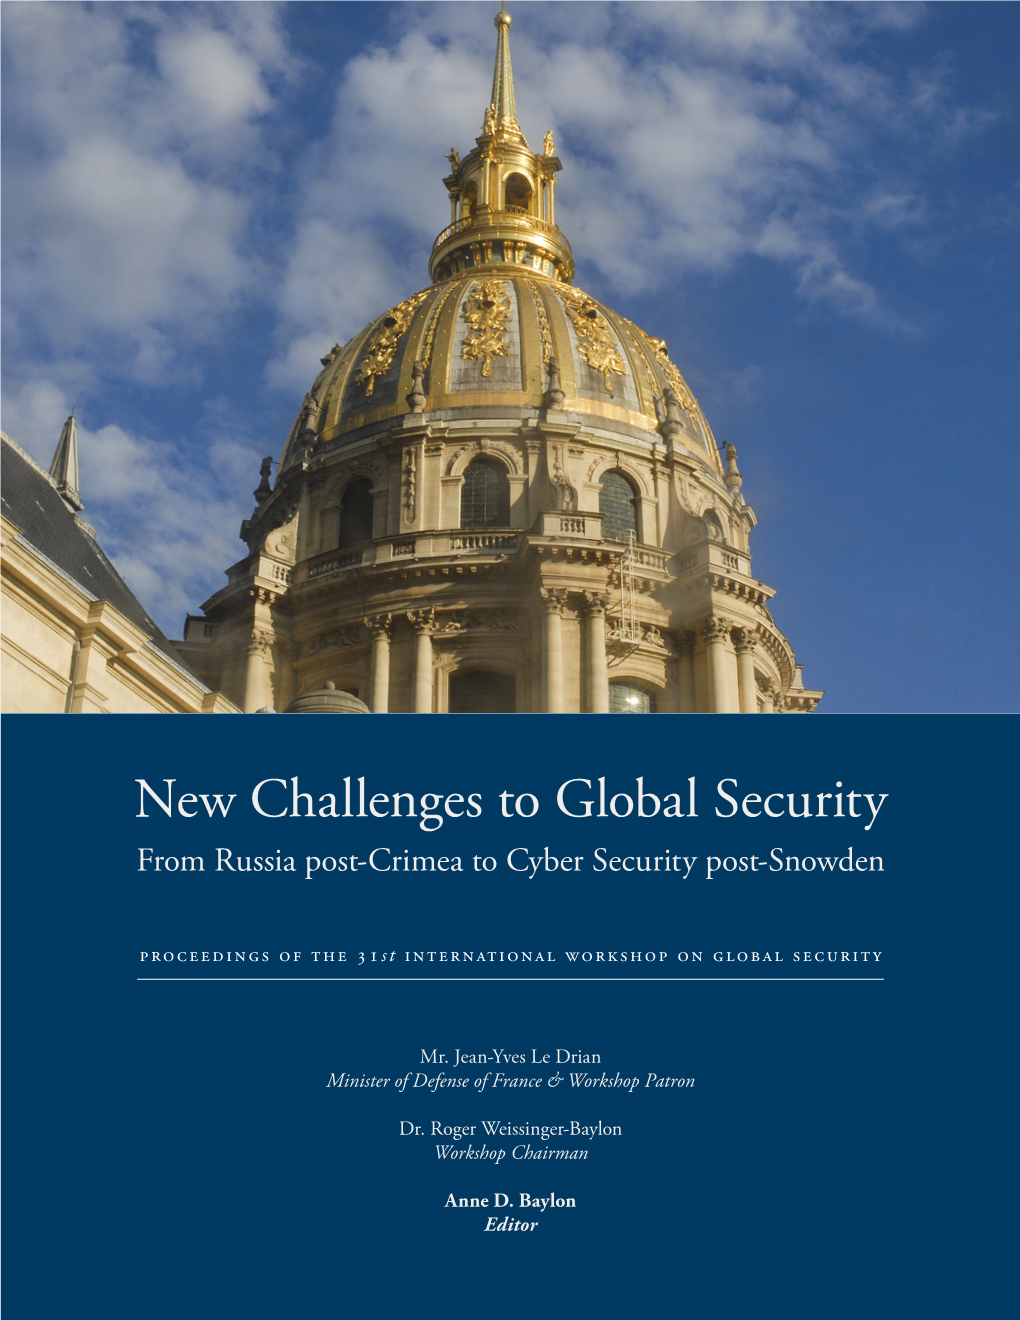 New Challenges to Global Security from Russia Post-Crimea to Cyber Security Post-Snowden